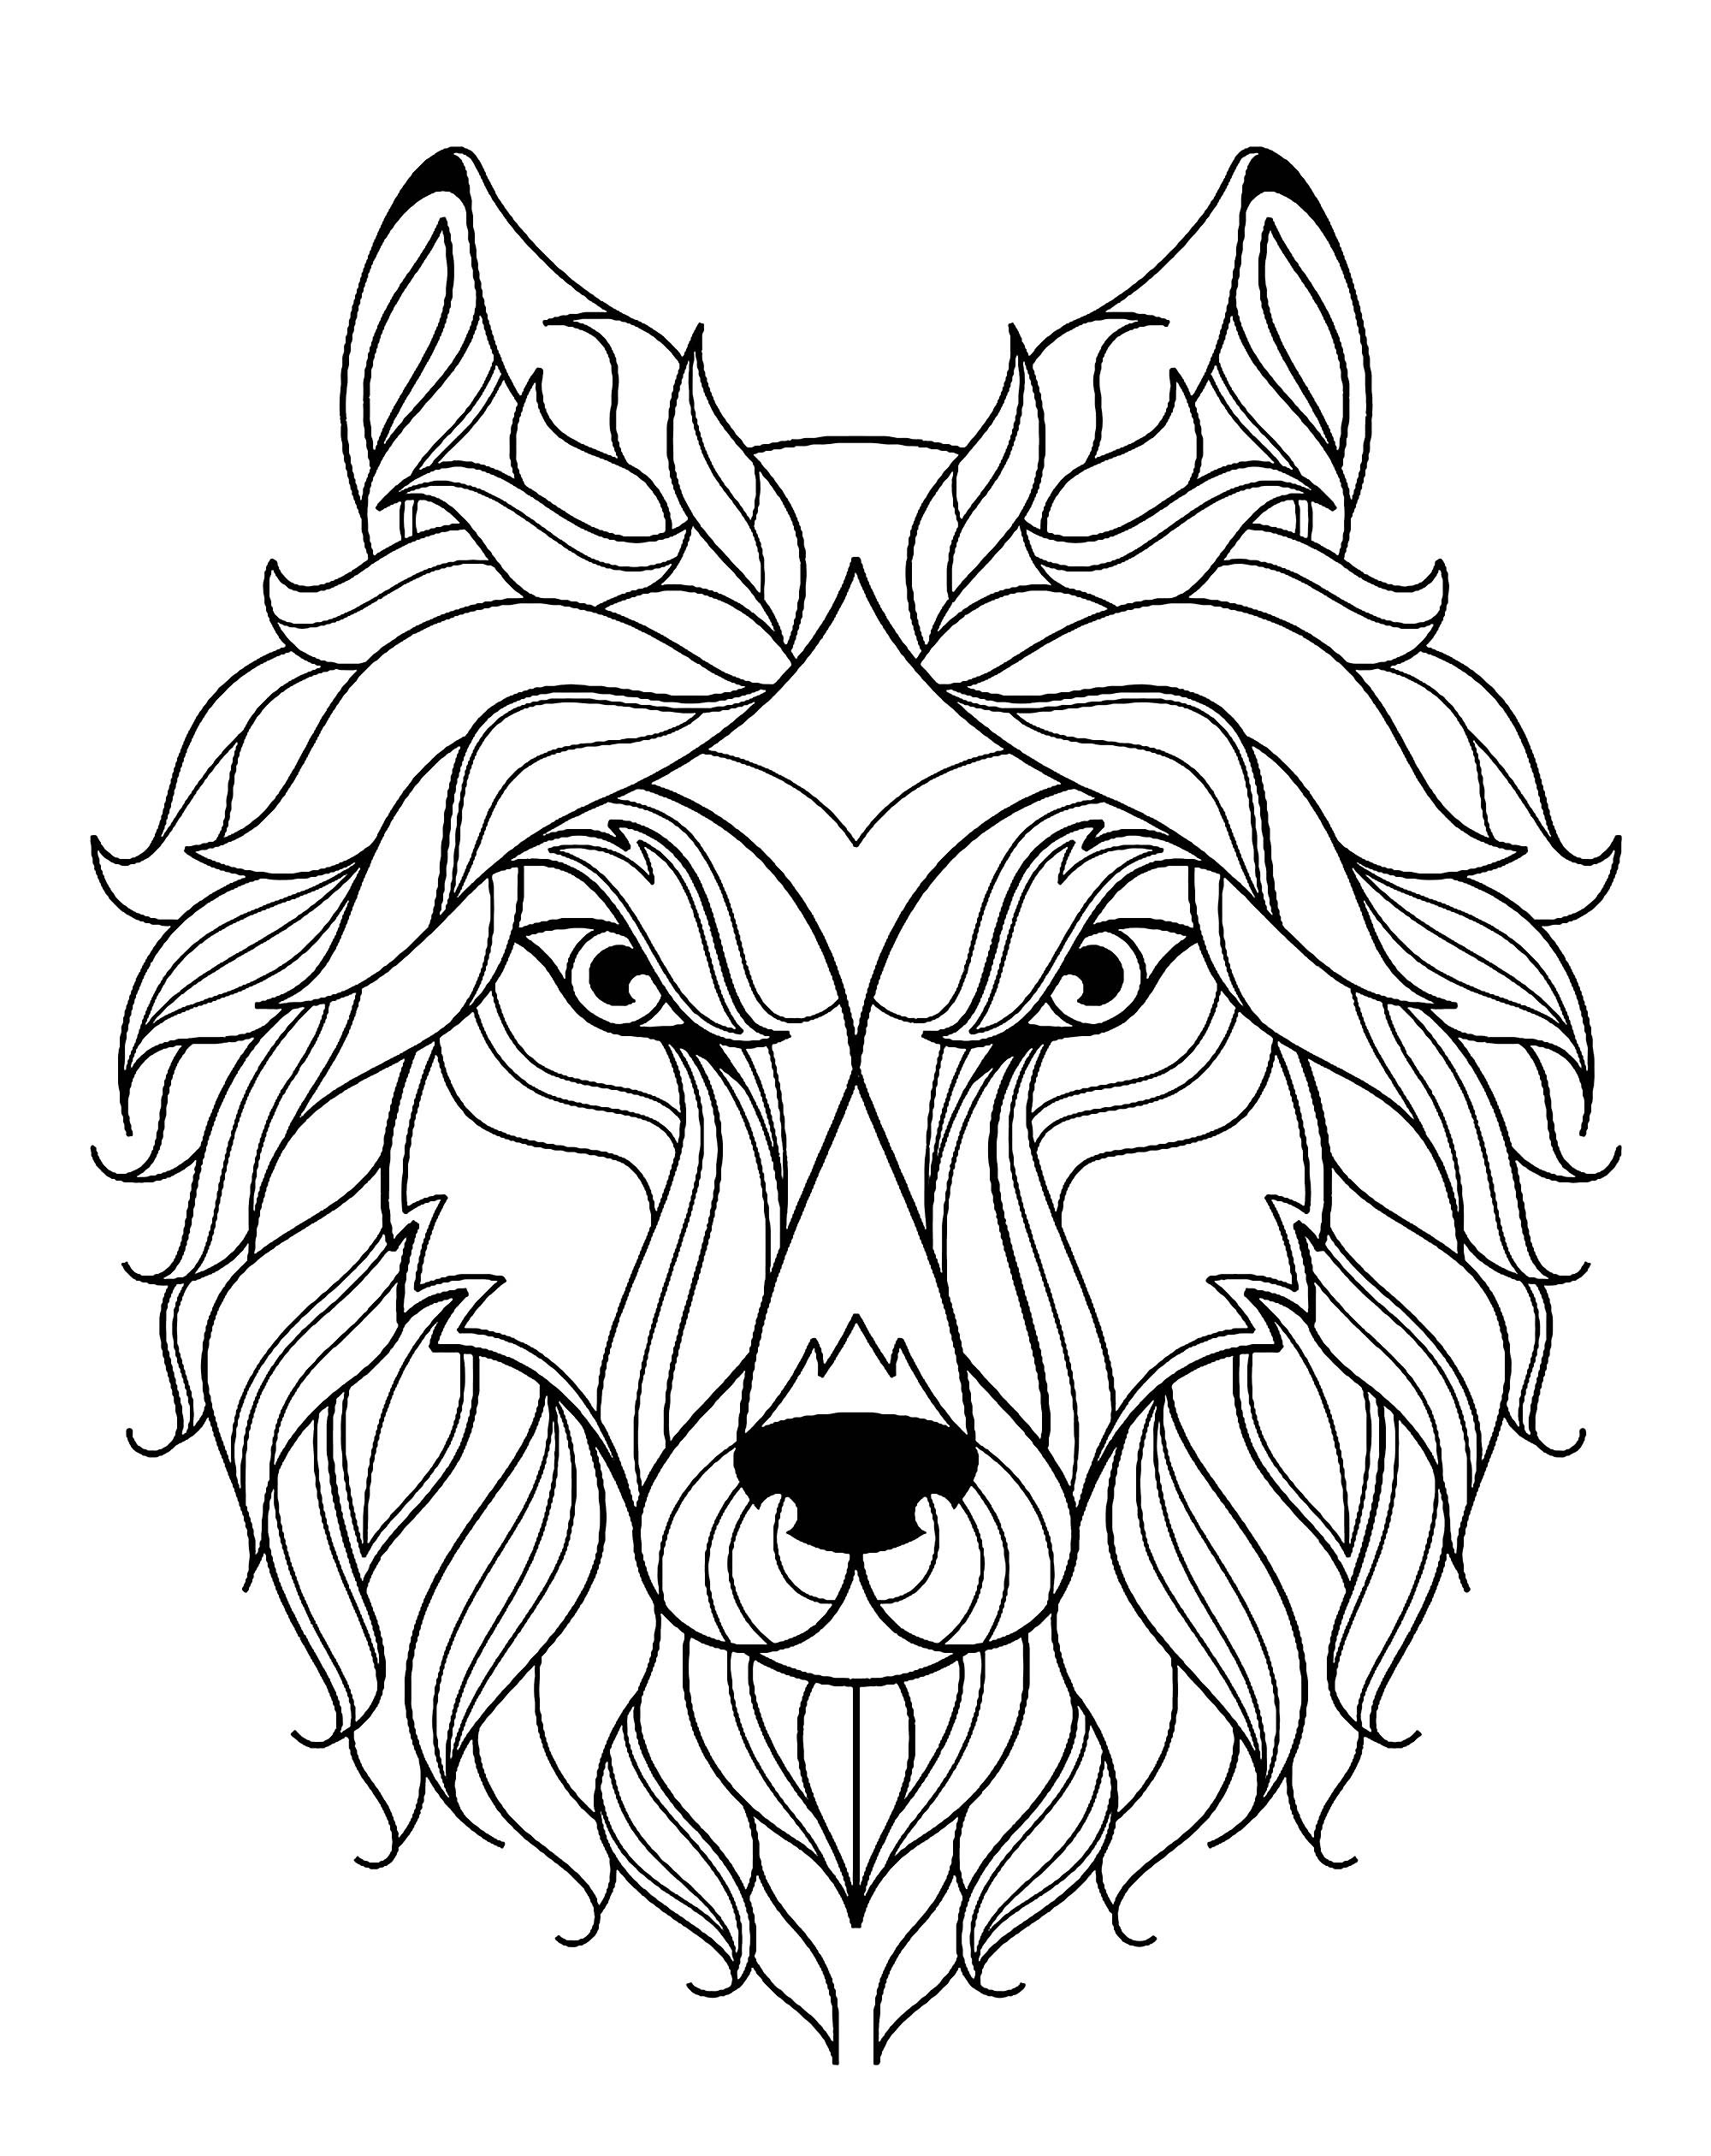 Adult Coloring Pages Wolf
 Big wolf head simple Wolves Adult Coloring Pages